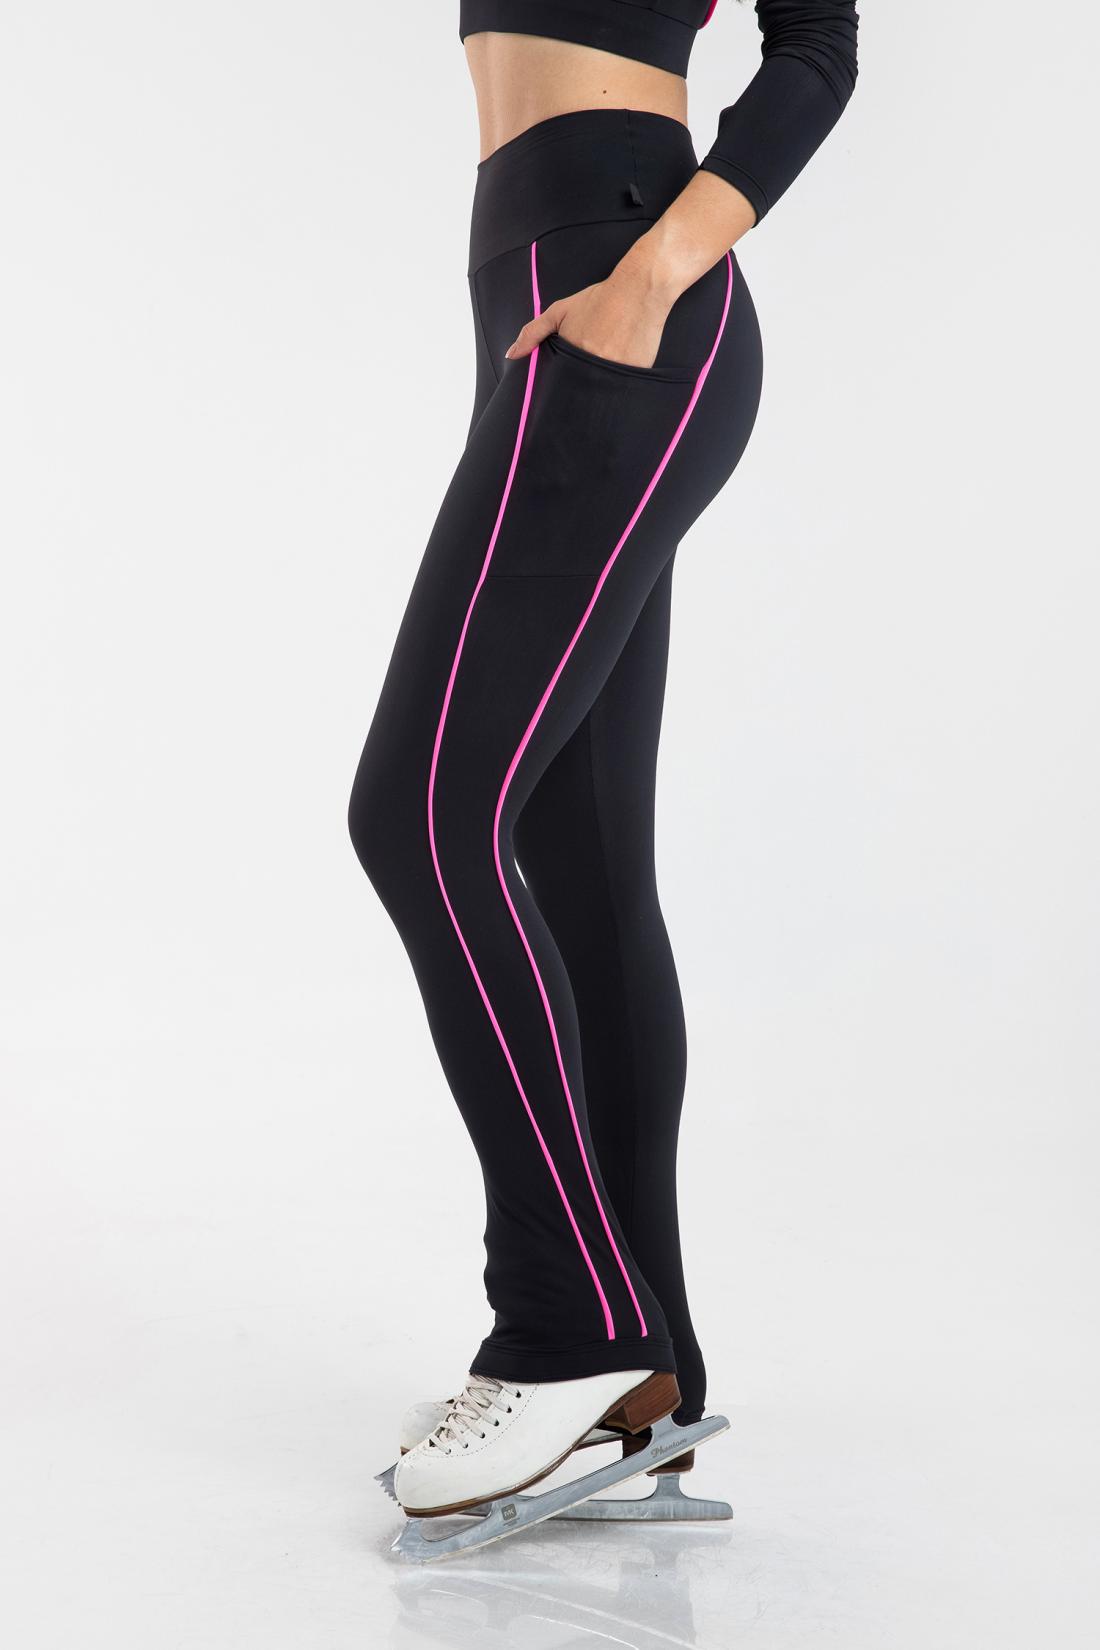 High-rise heel cover pant with colored piping for Intermezzo Figure Skating